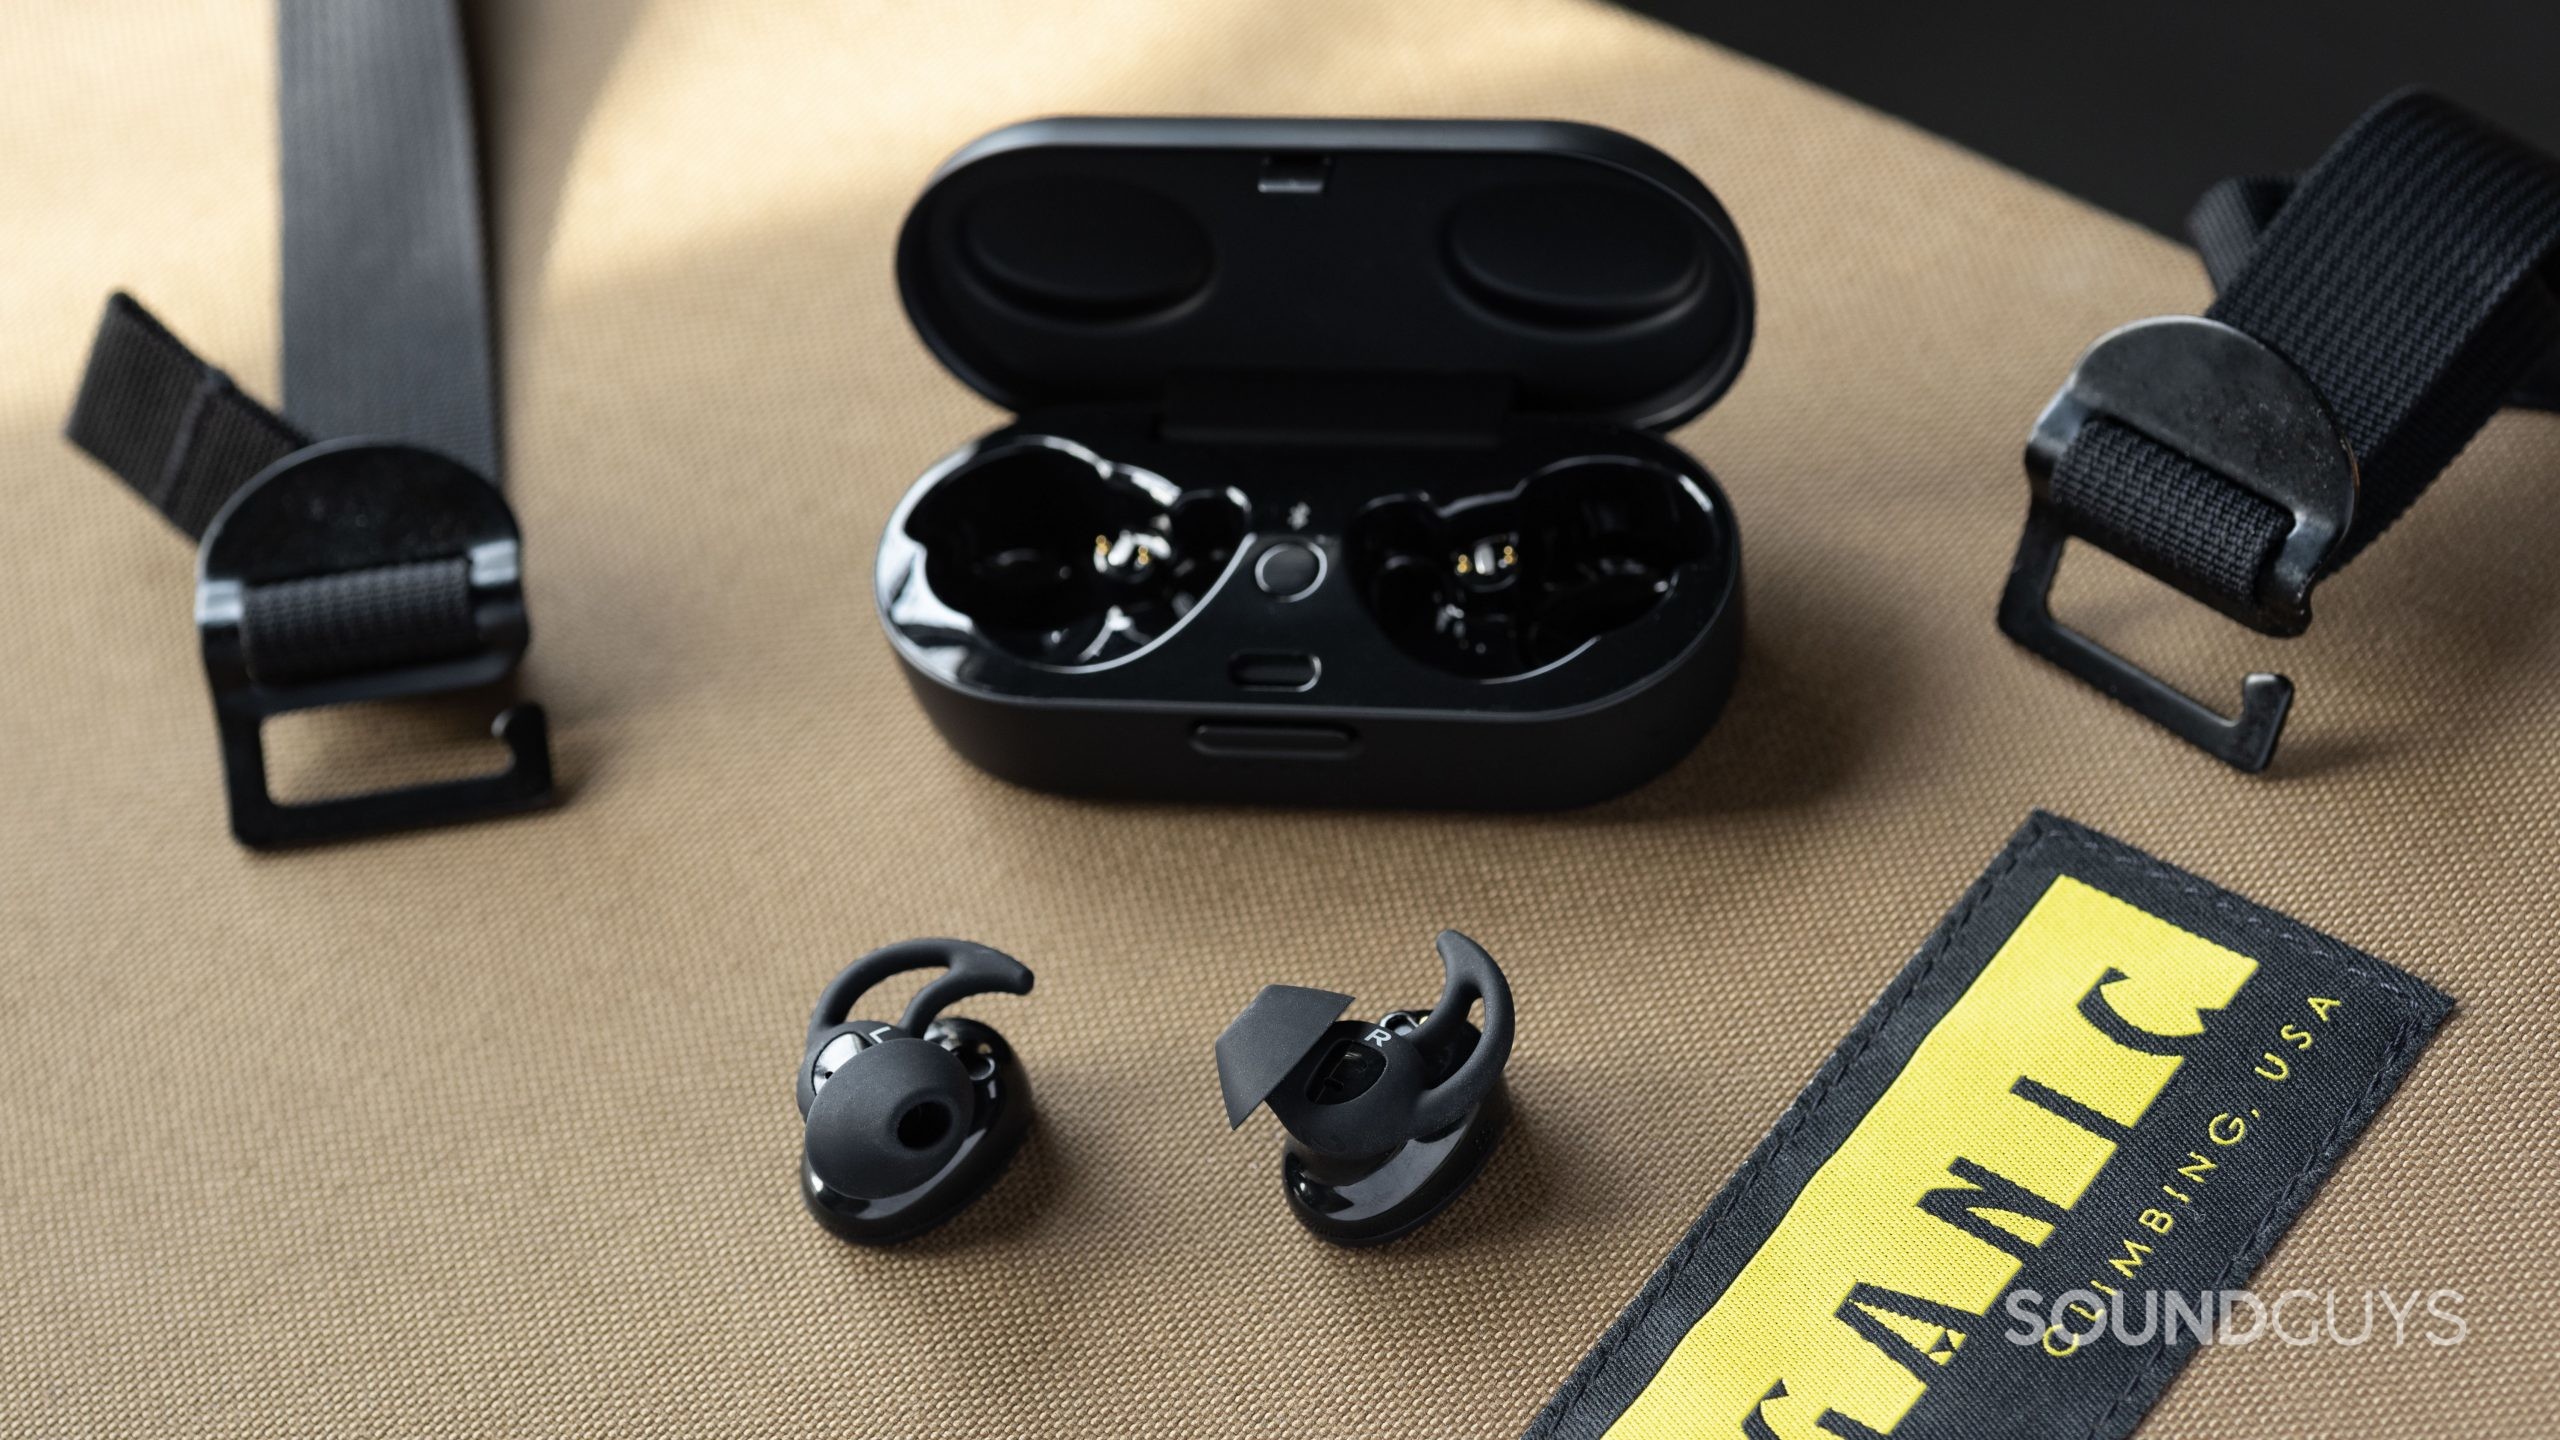 The Bose Sport Earbuds true wireless workout earbuds outside of the open charging case; the earbuds are facing belly-up so the StayHear Max ear tips are in full view.